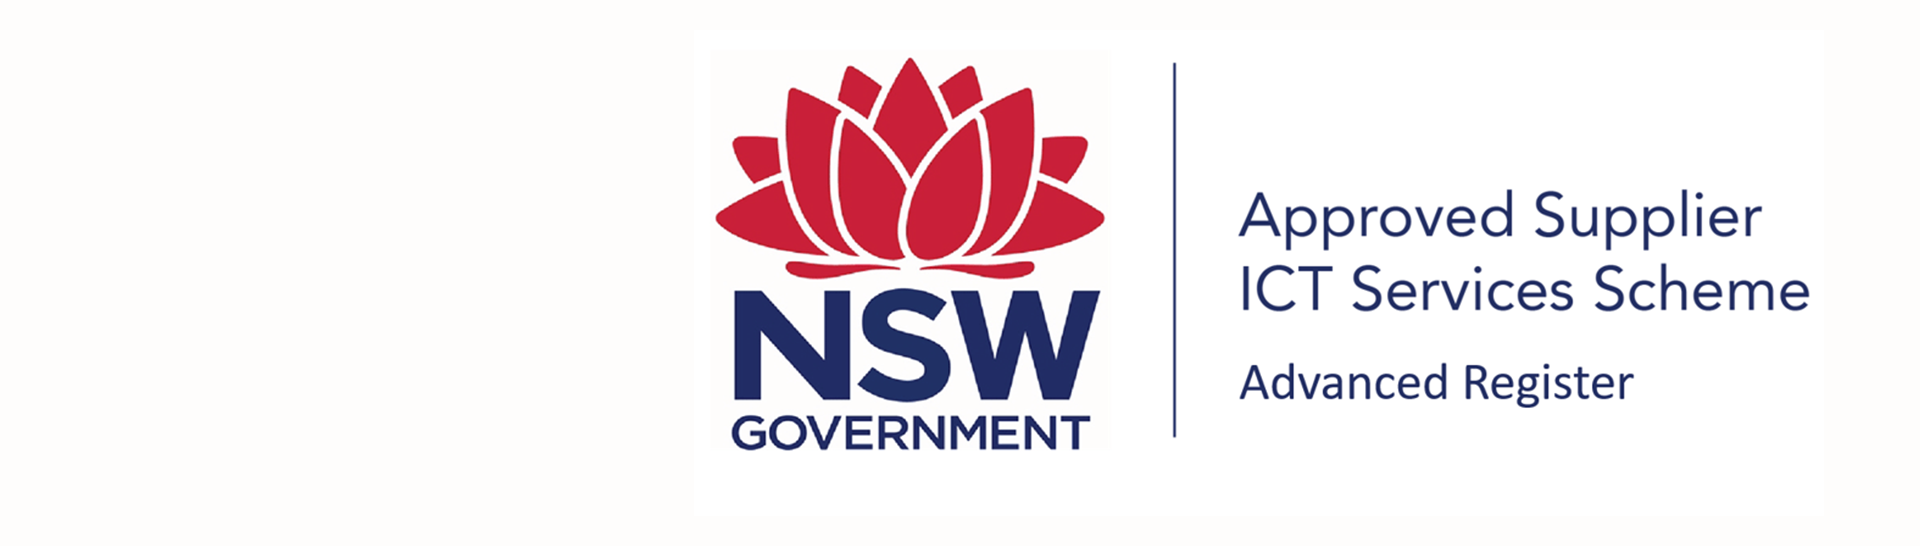 MobileCorp-NSW Government ICT Services Scheme resized